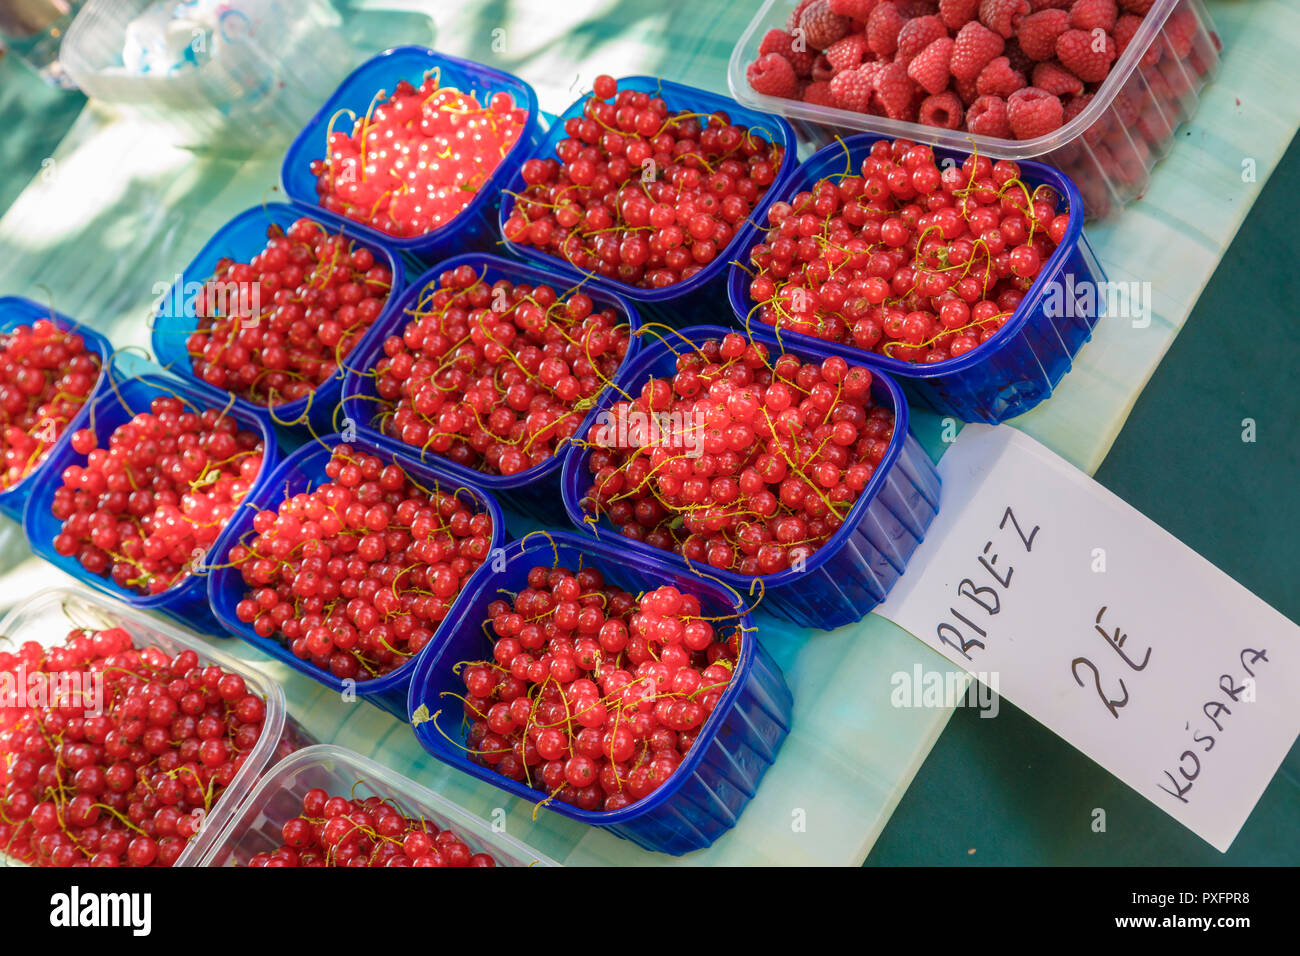 Currant fruits in a street stall. Stock Photo